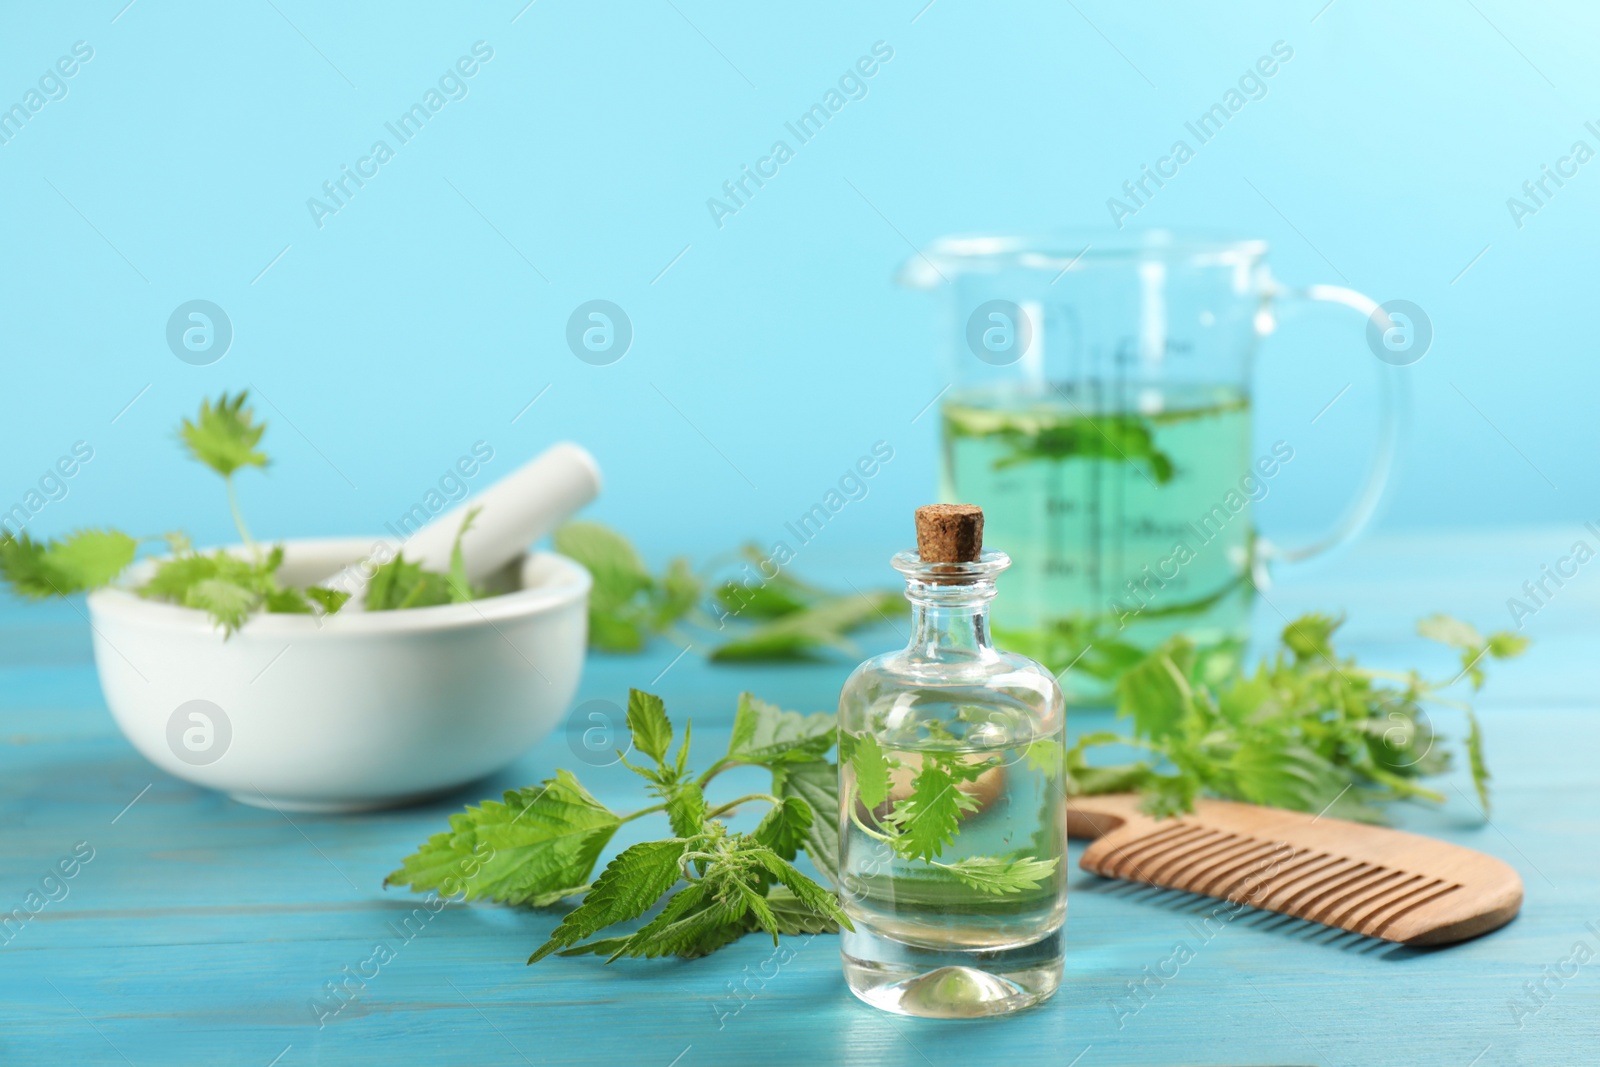 Photo of Stinging nettle extract and comb on light blue wooden background. Natural hair care